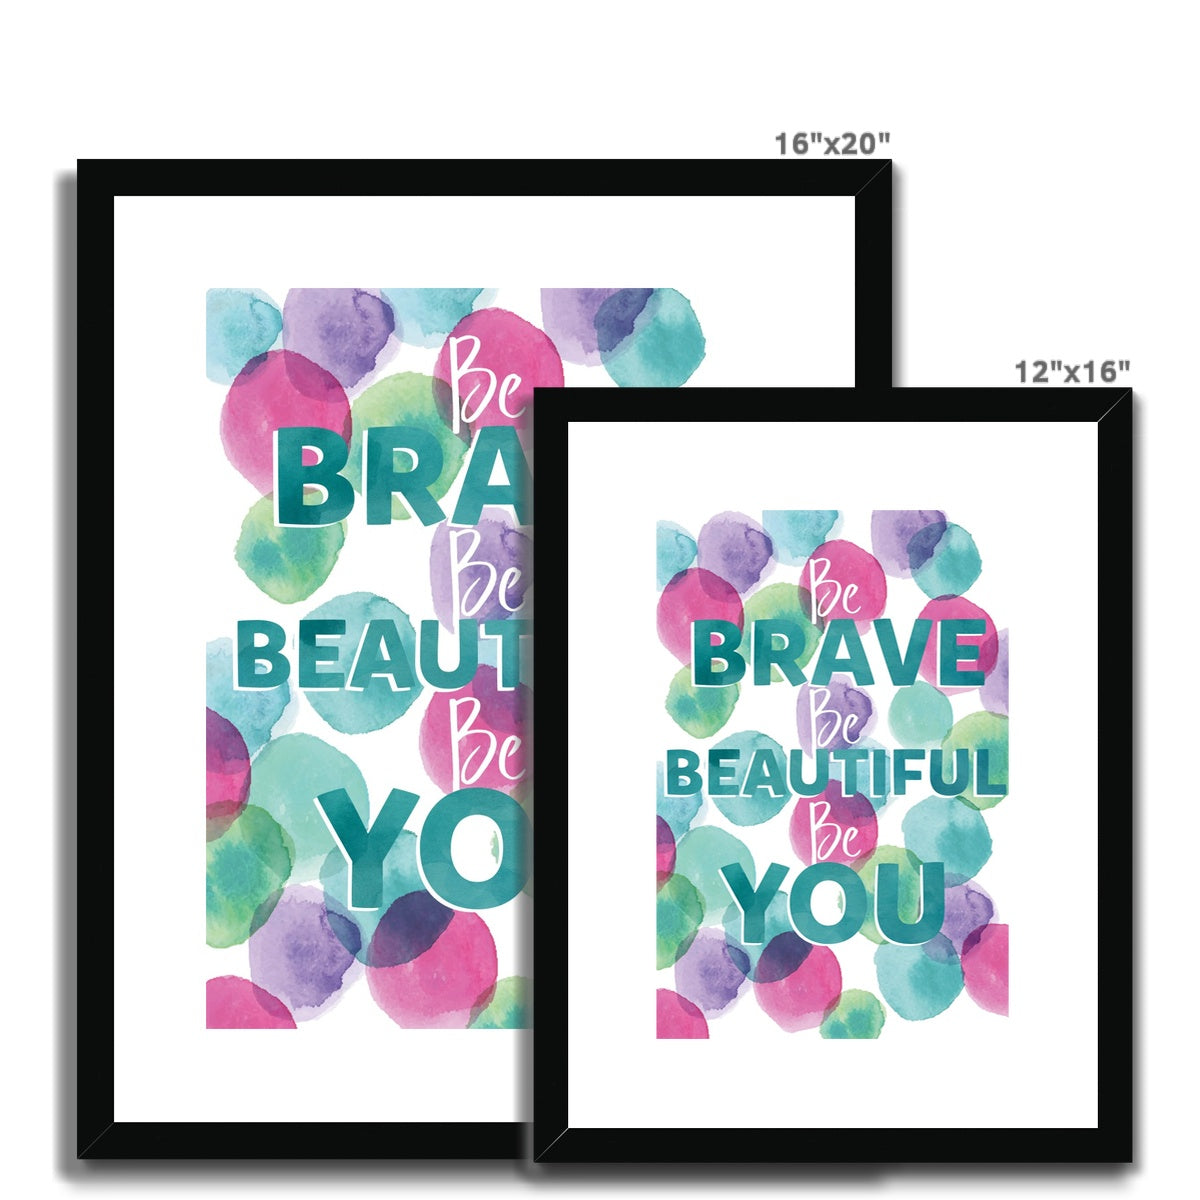 Be Brave Be Beautiful Be You Framed & Mounted Print